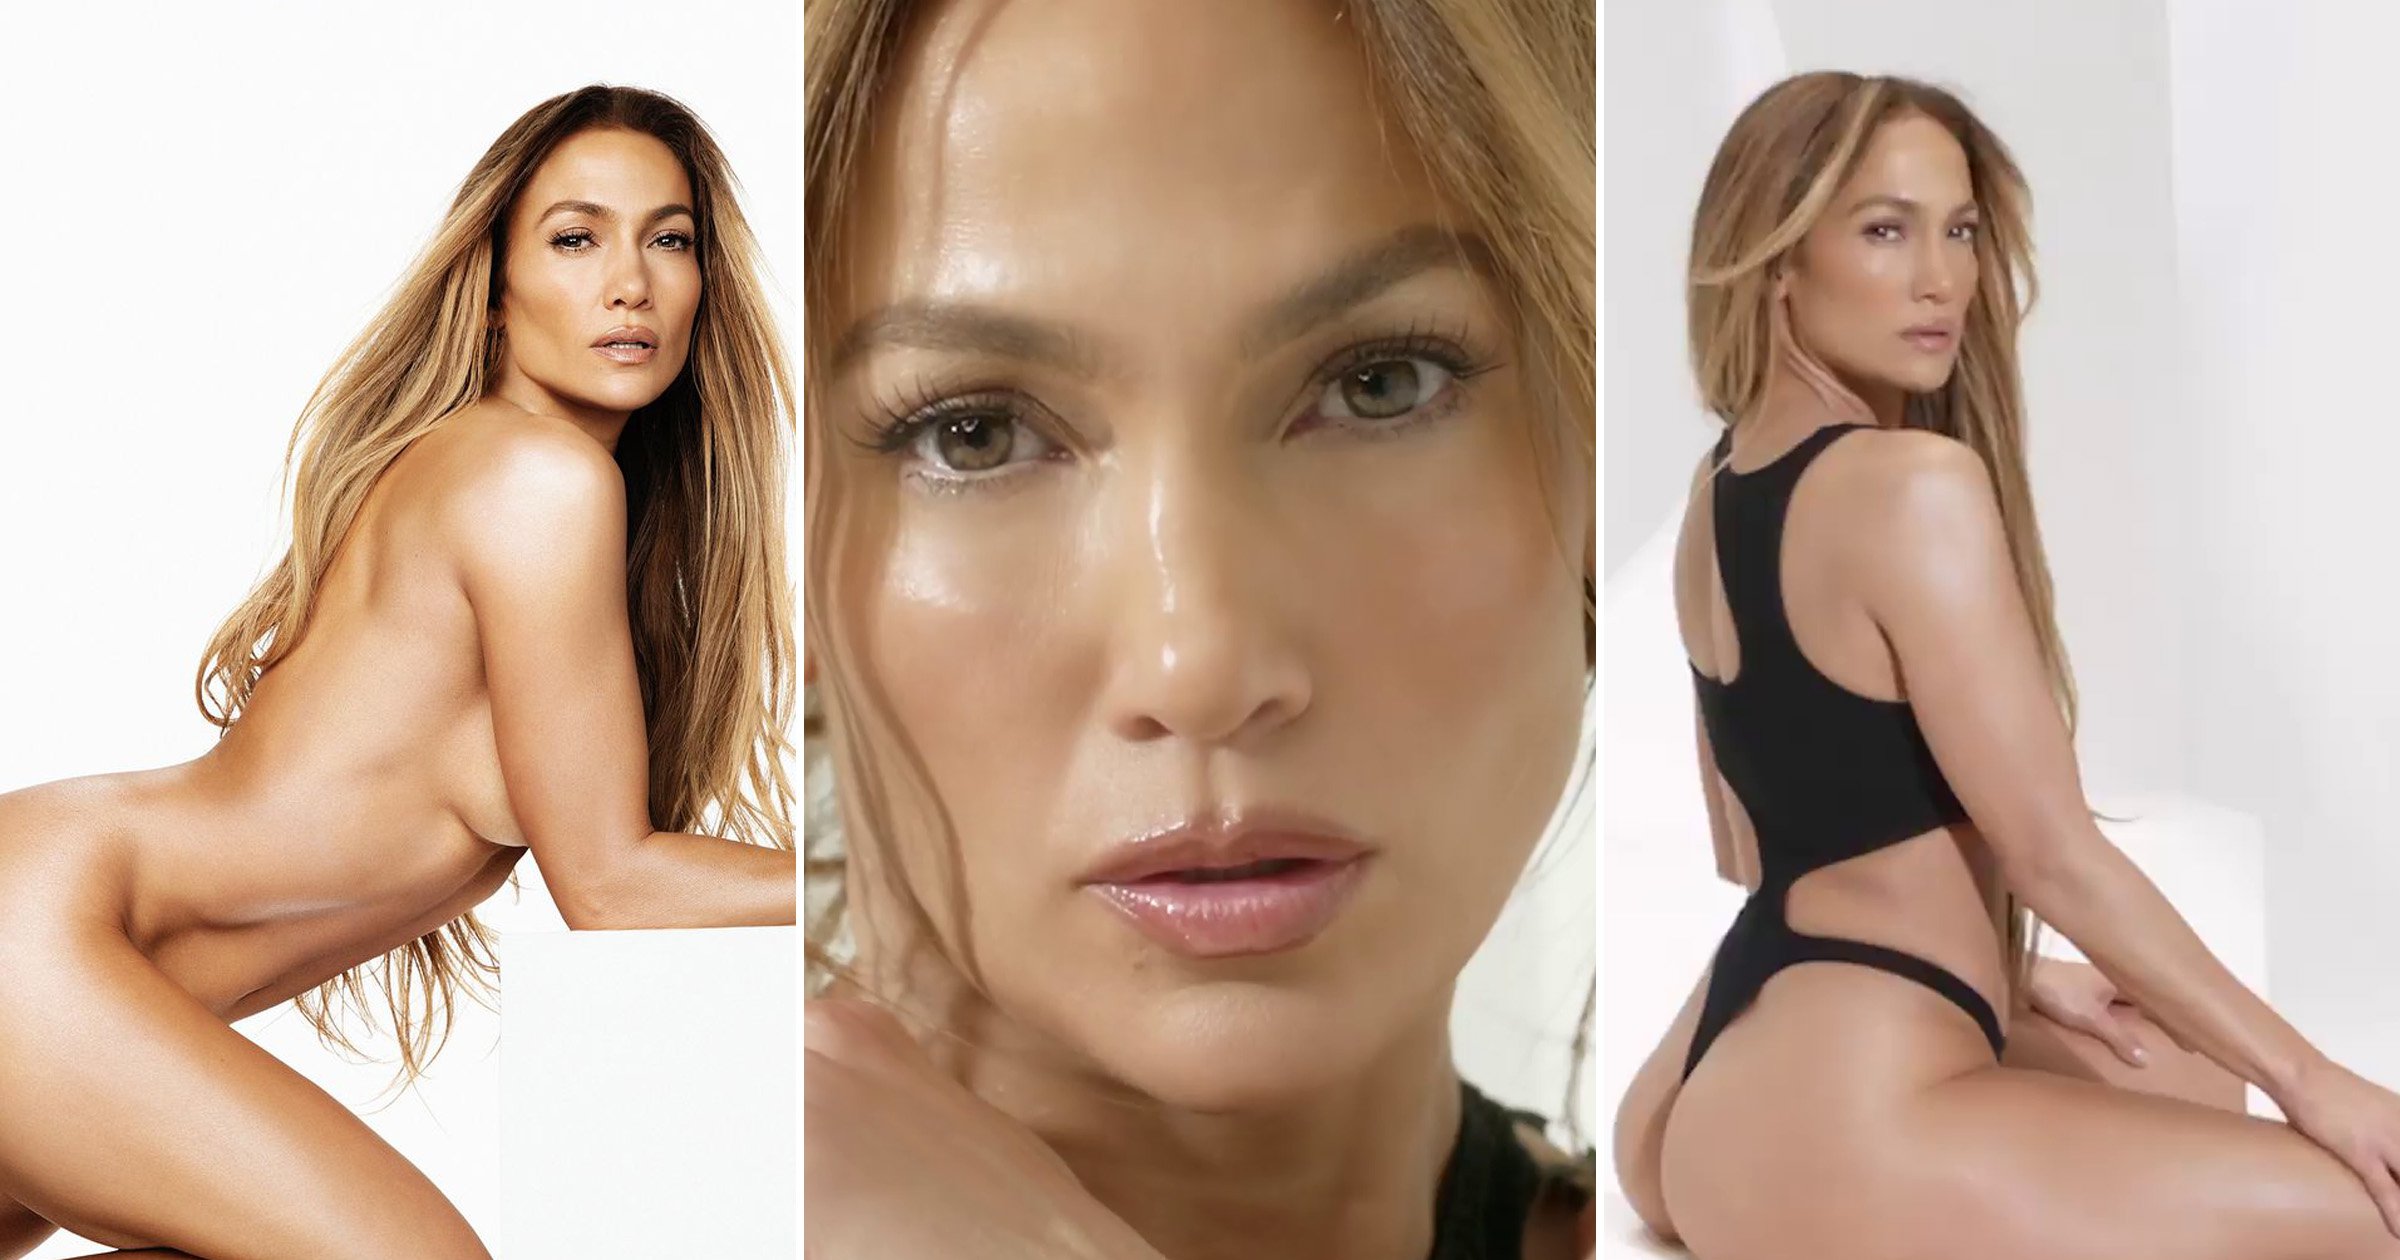 andy wi recommends jennifer lopez naked video pic